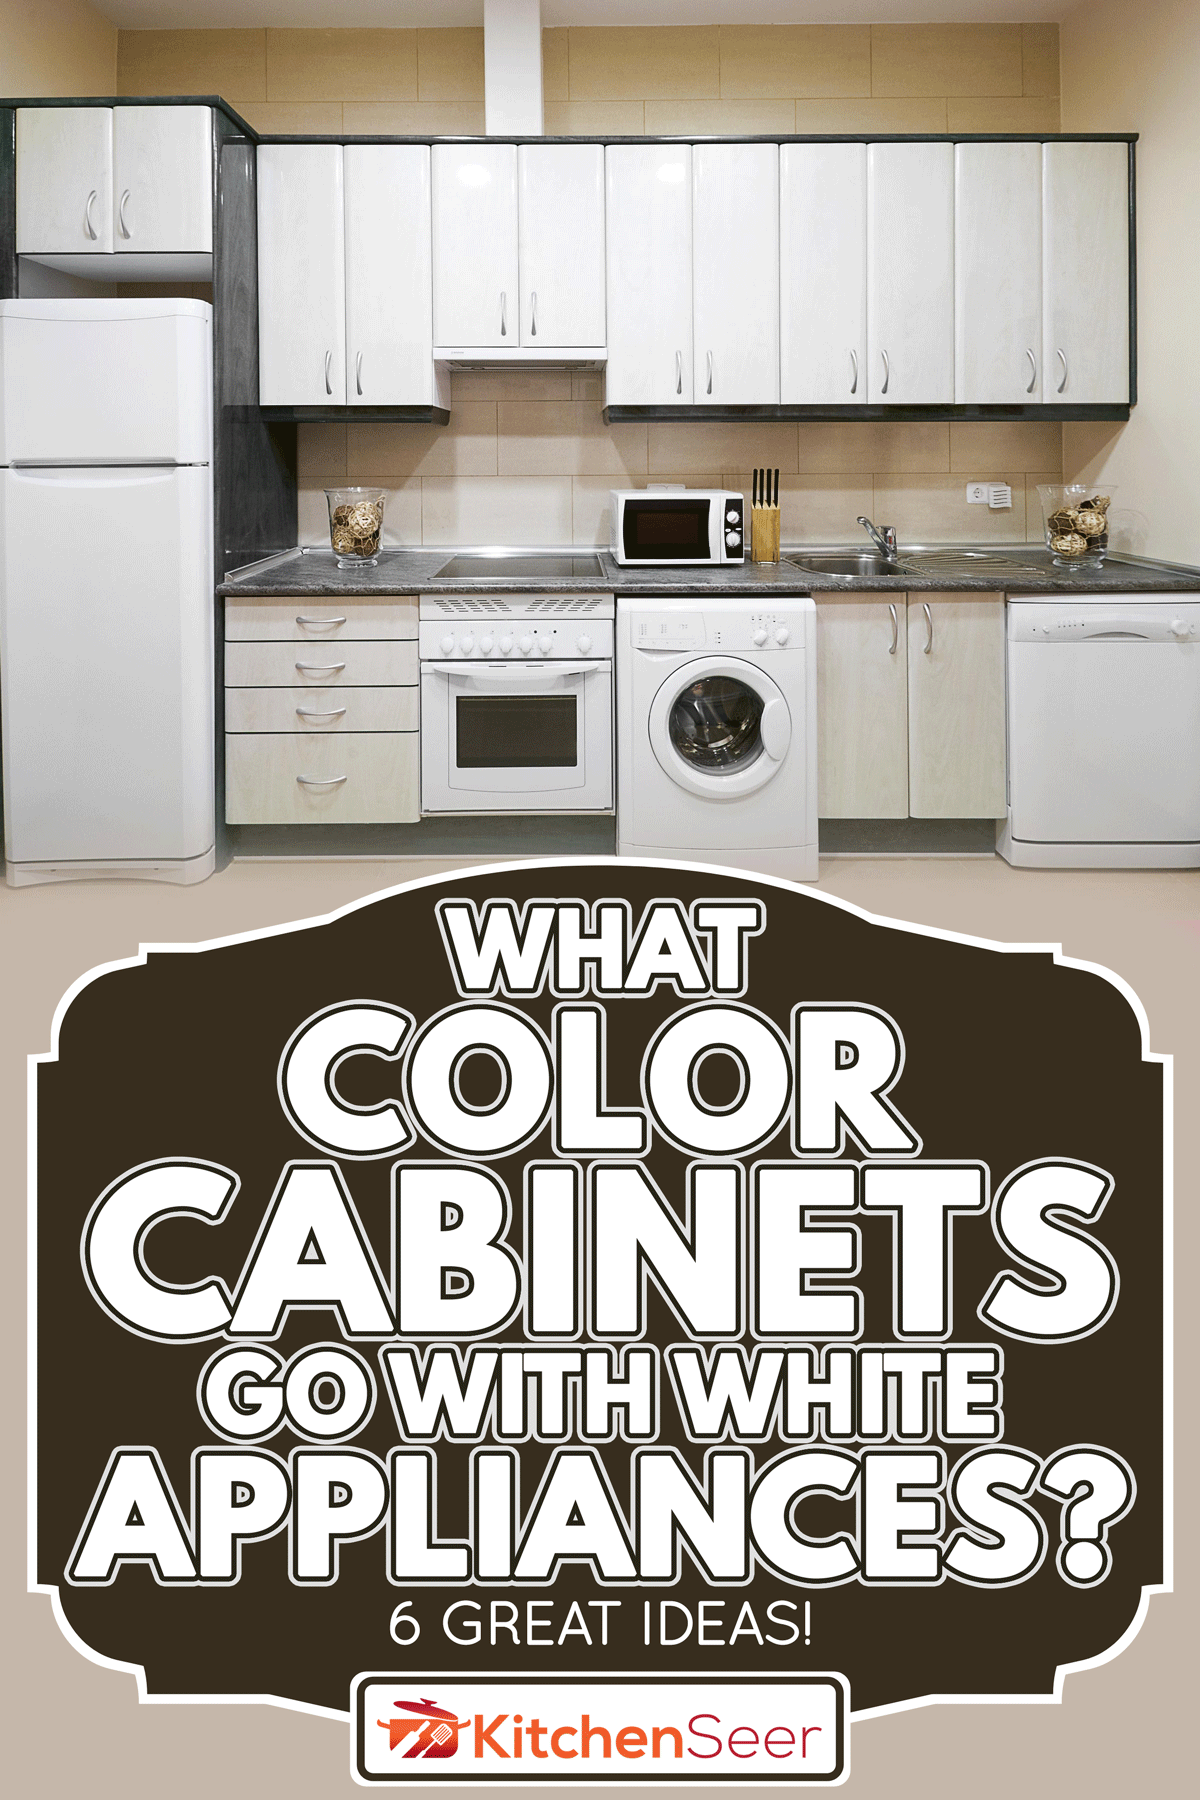 Luxurious kitchen interior with appliances, What Color Cabinets Go With White Appliances? [6 Great Ideas!]